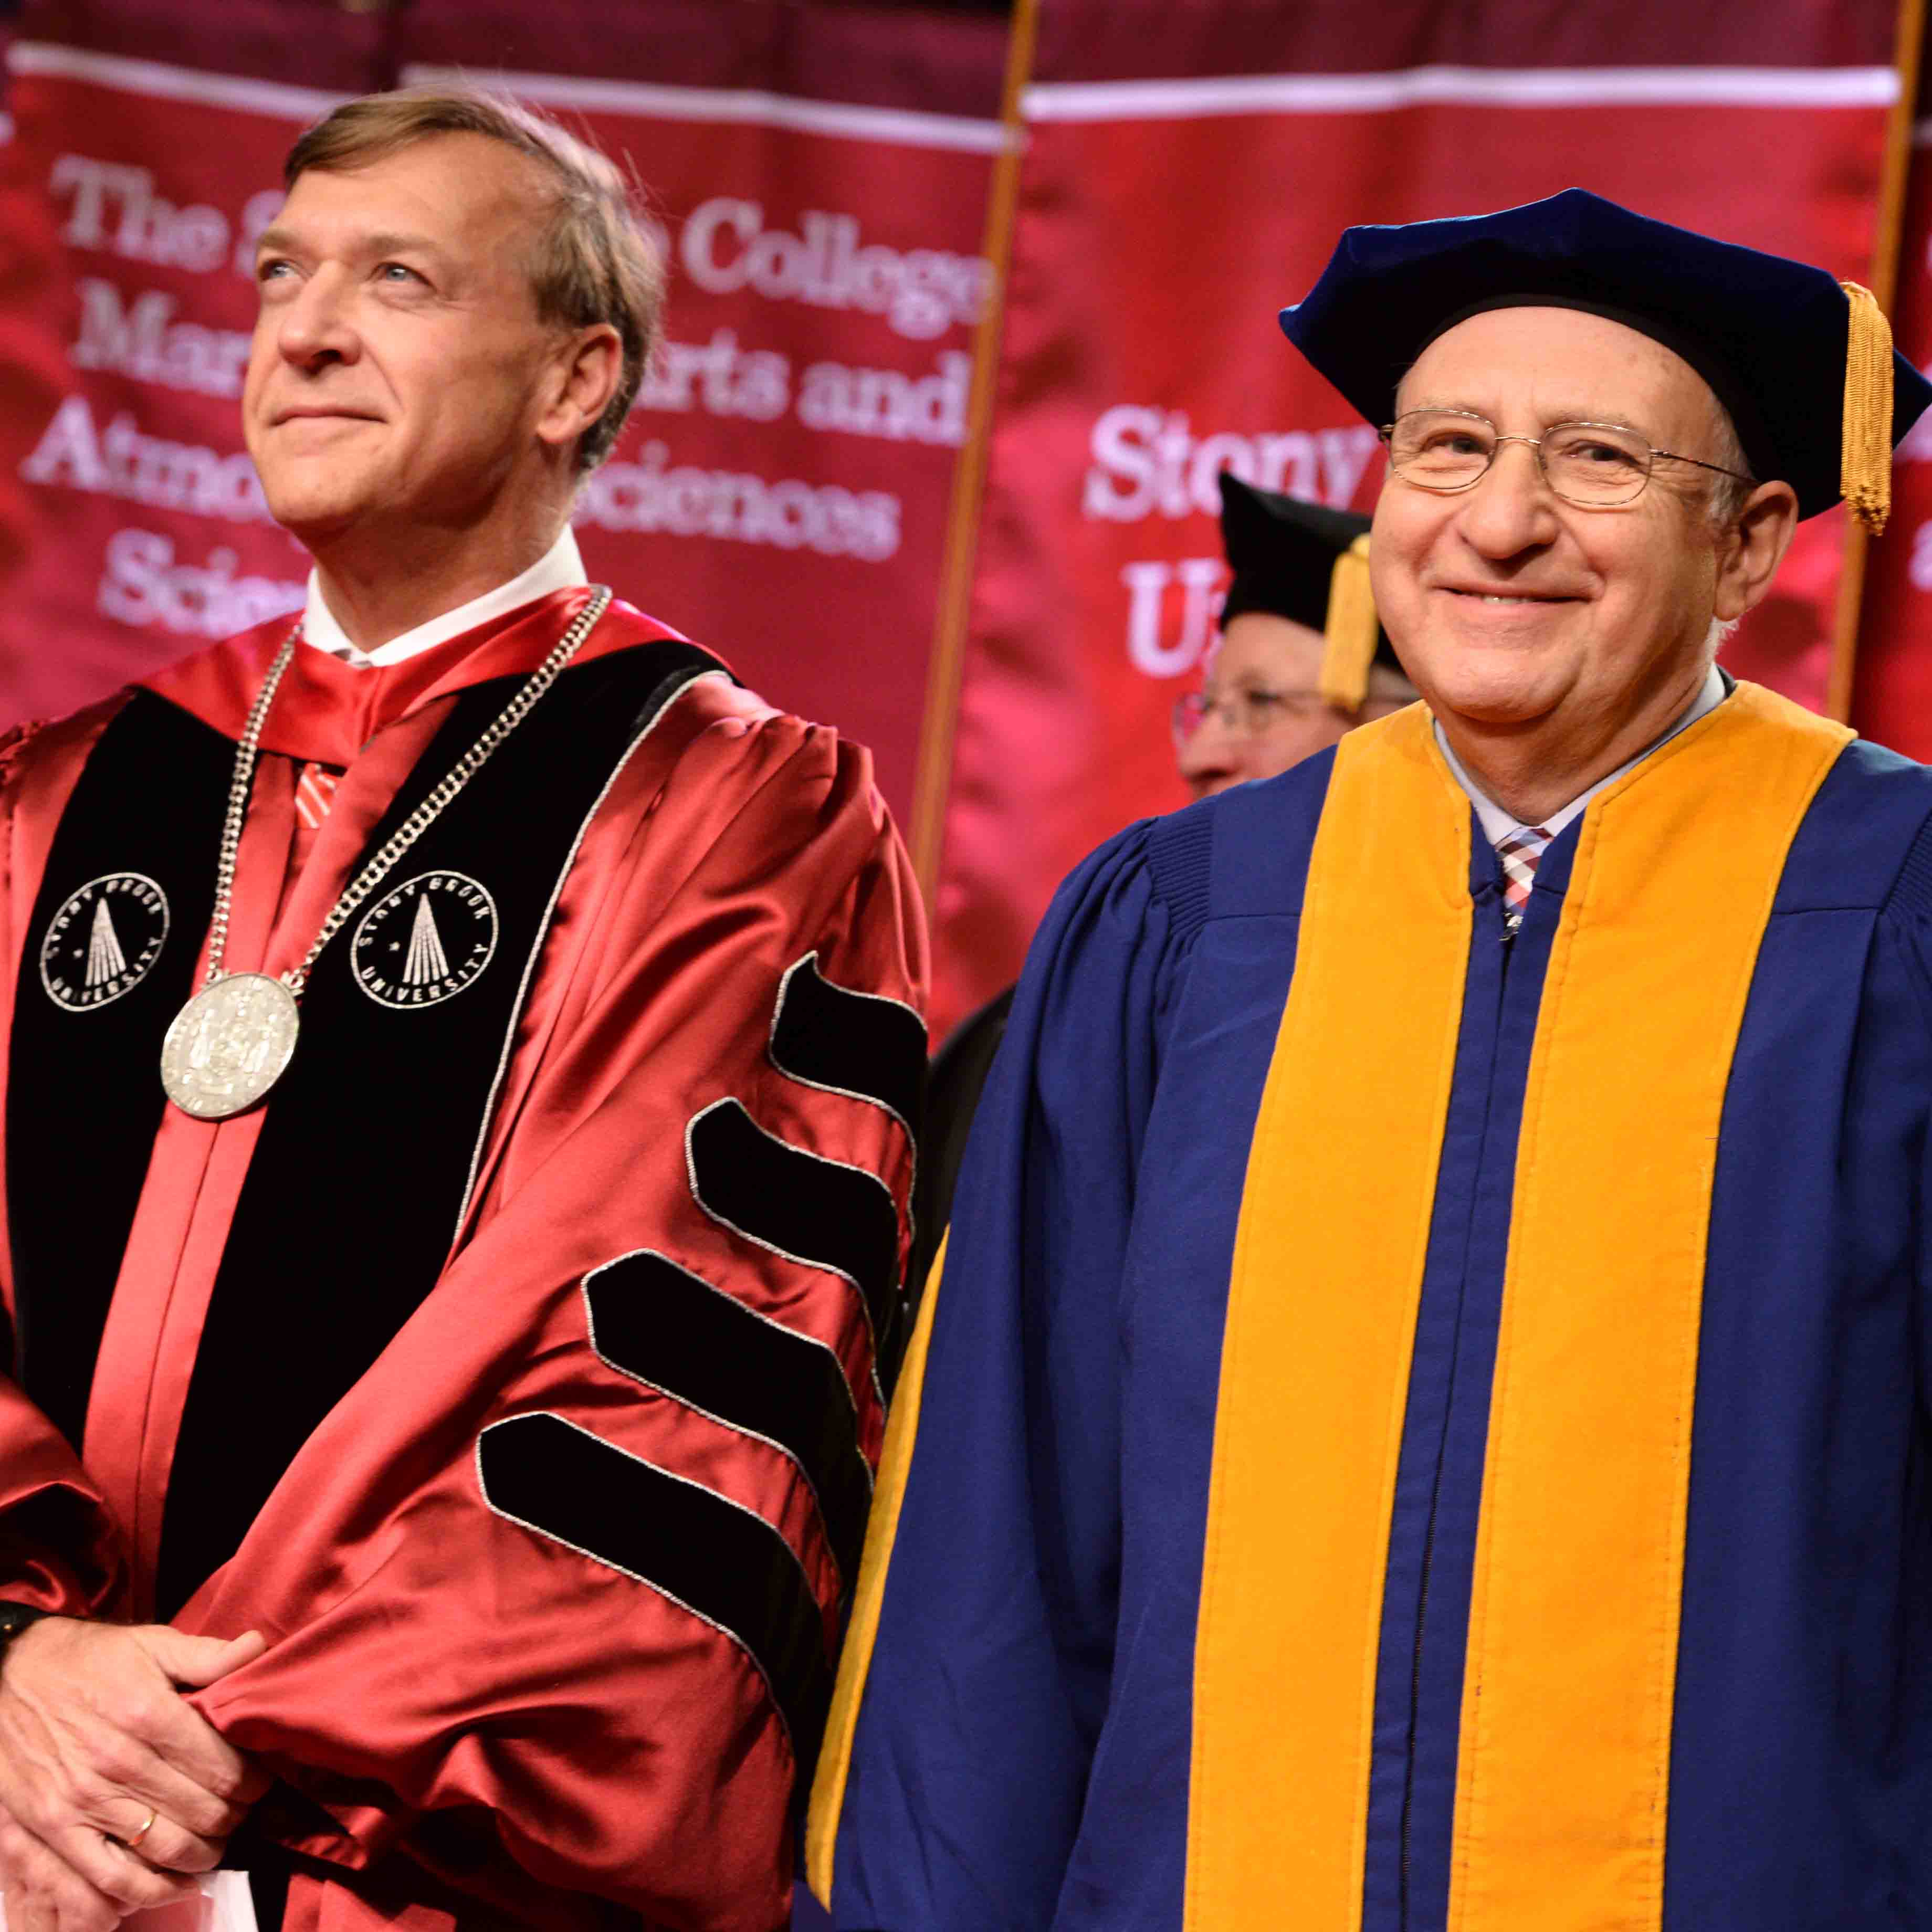 Ben Shneiderman receives Honorary Doctorate from SUNY-Stony Brook and gives Commencement Address, May 21, 2015